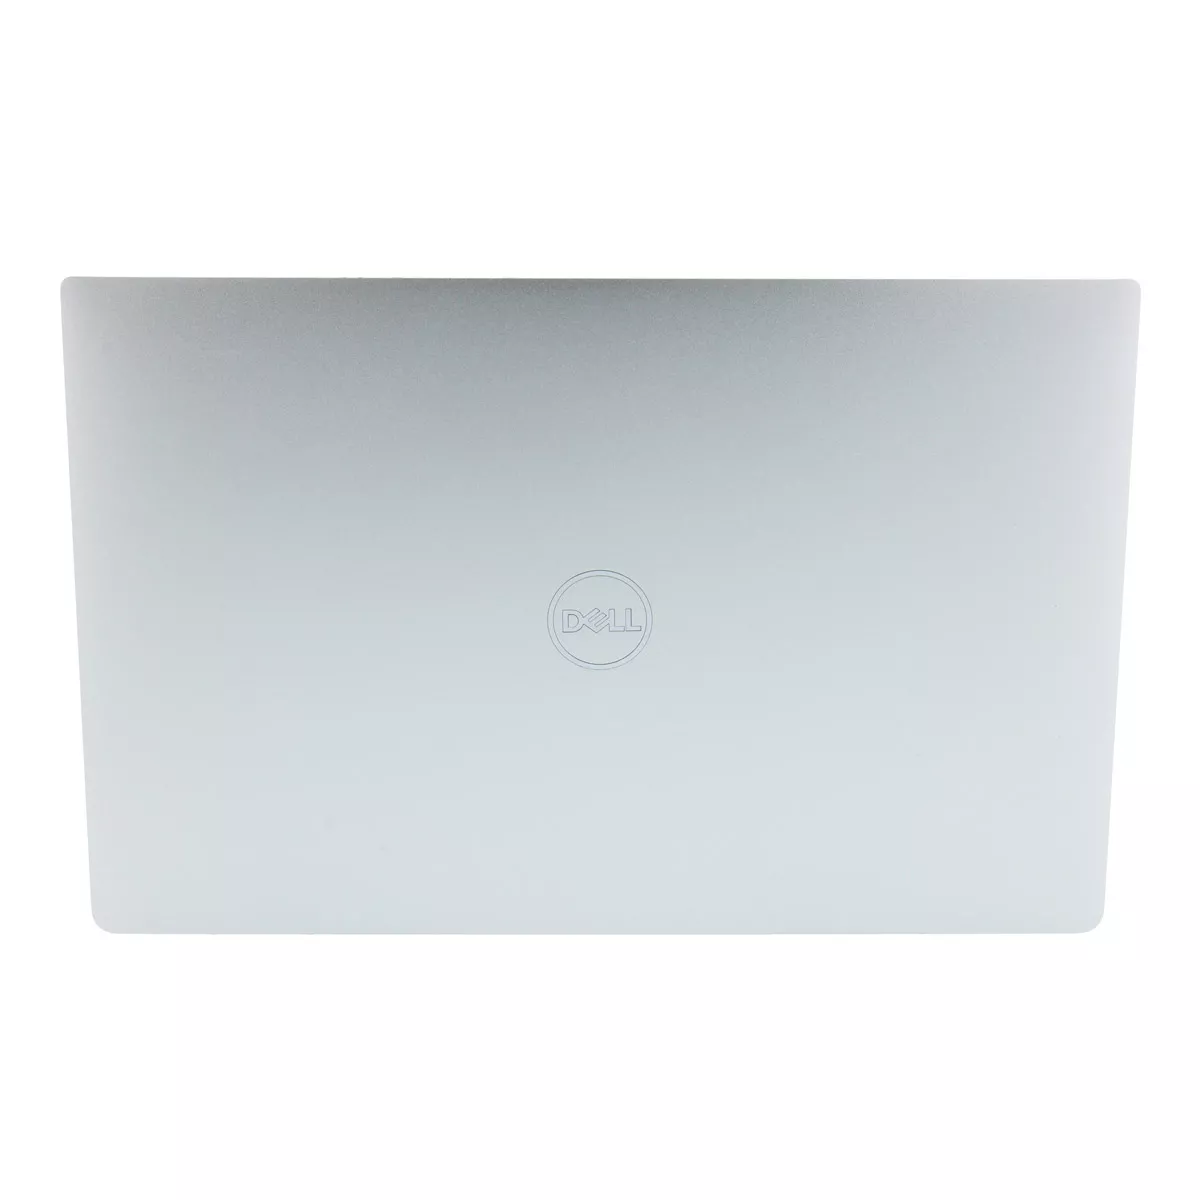 Dell XPS 13 - 9365 2-in-1 Core i7 8500Y Touch 16 GB 500 GB M.2 nVME SSD Webcam A